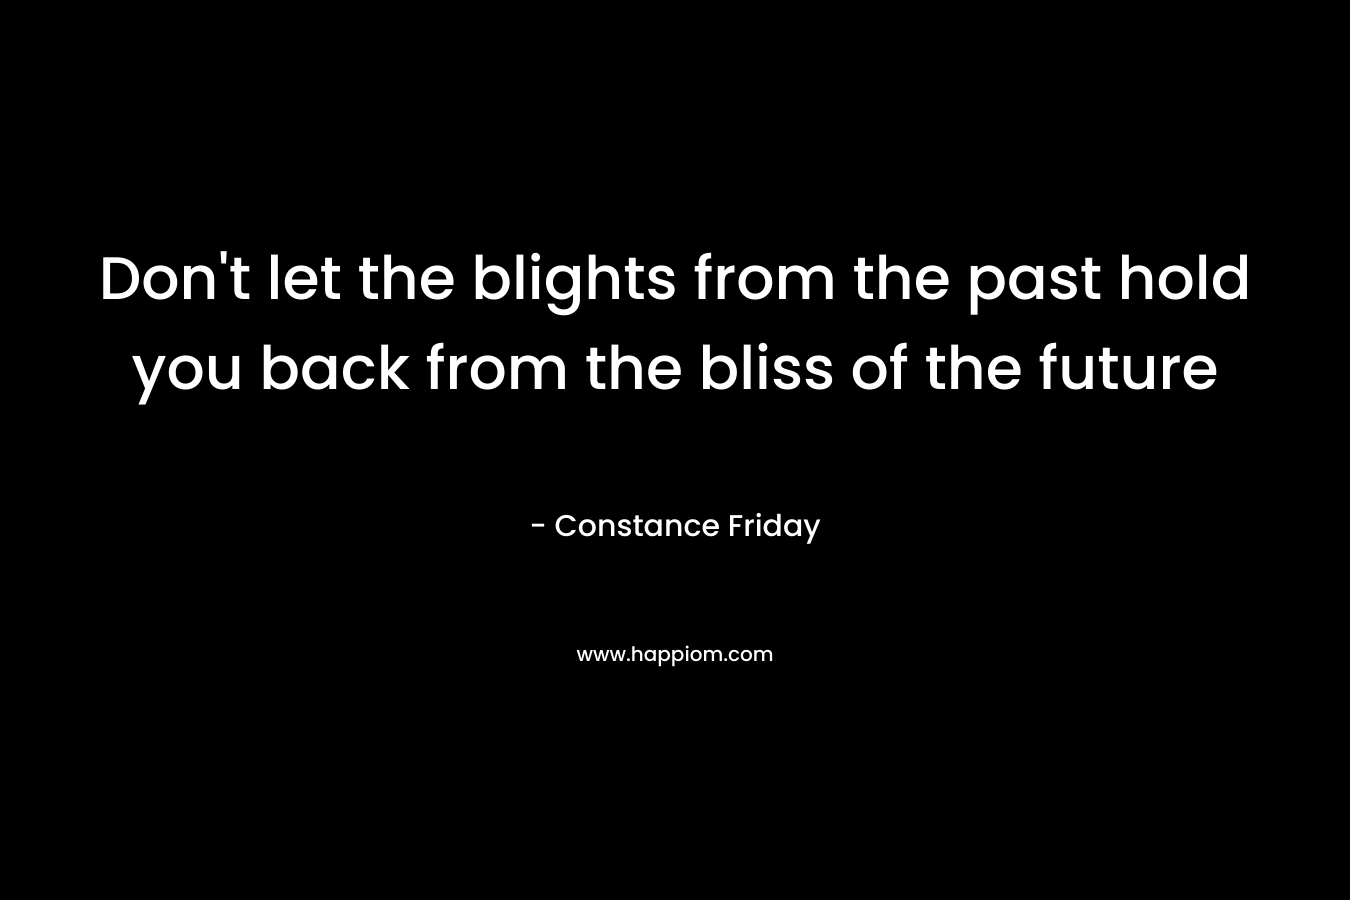 Don’t let the blights from the past hold you back from the bliss of the future – Constance Friday